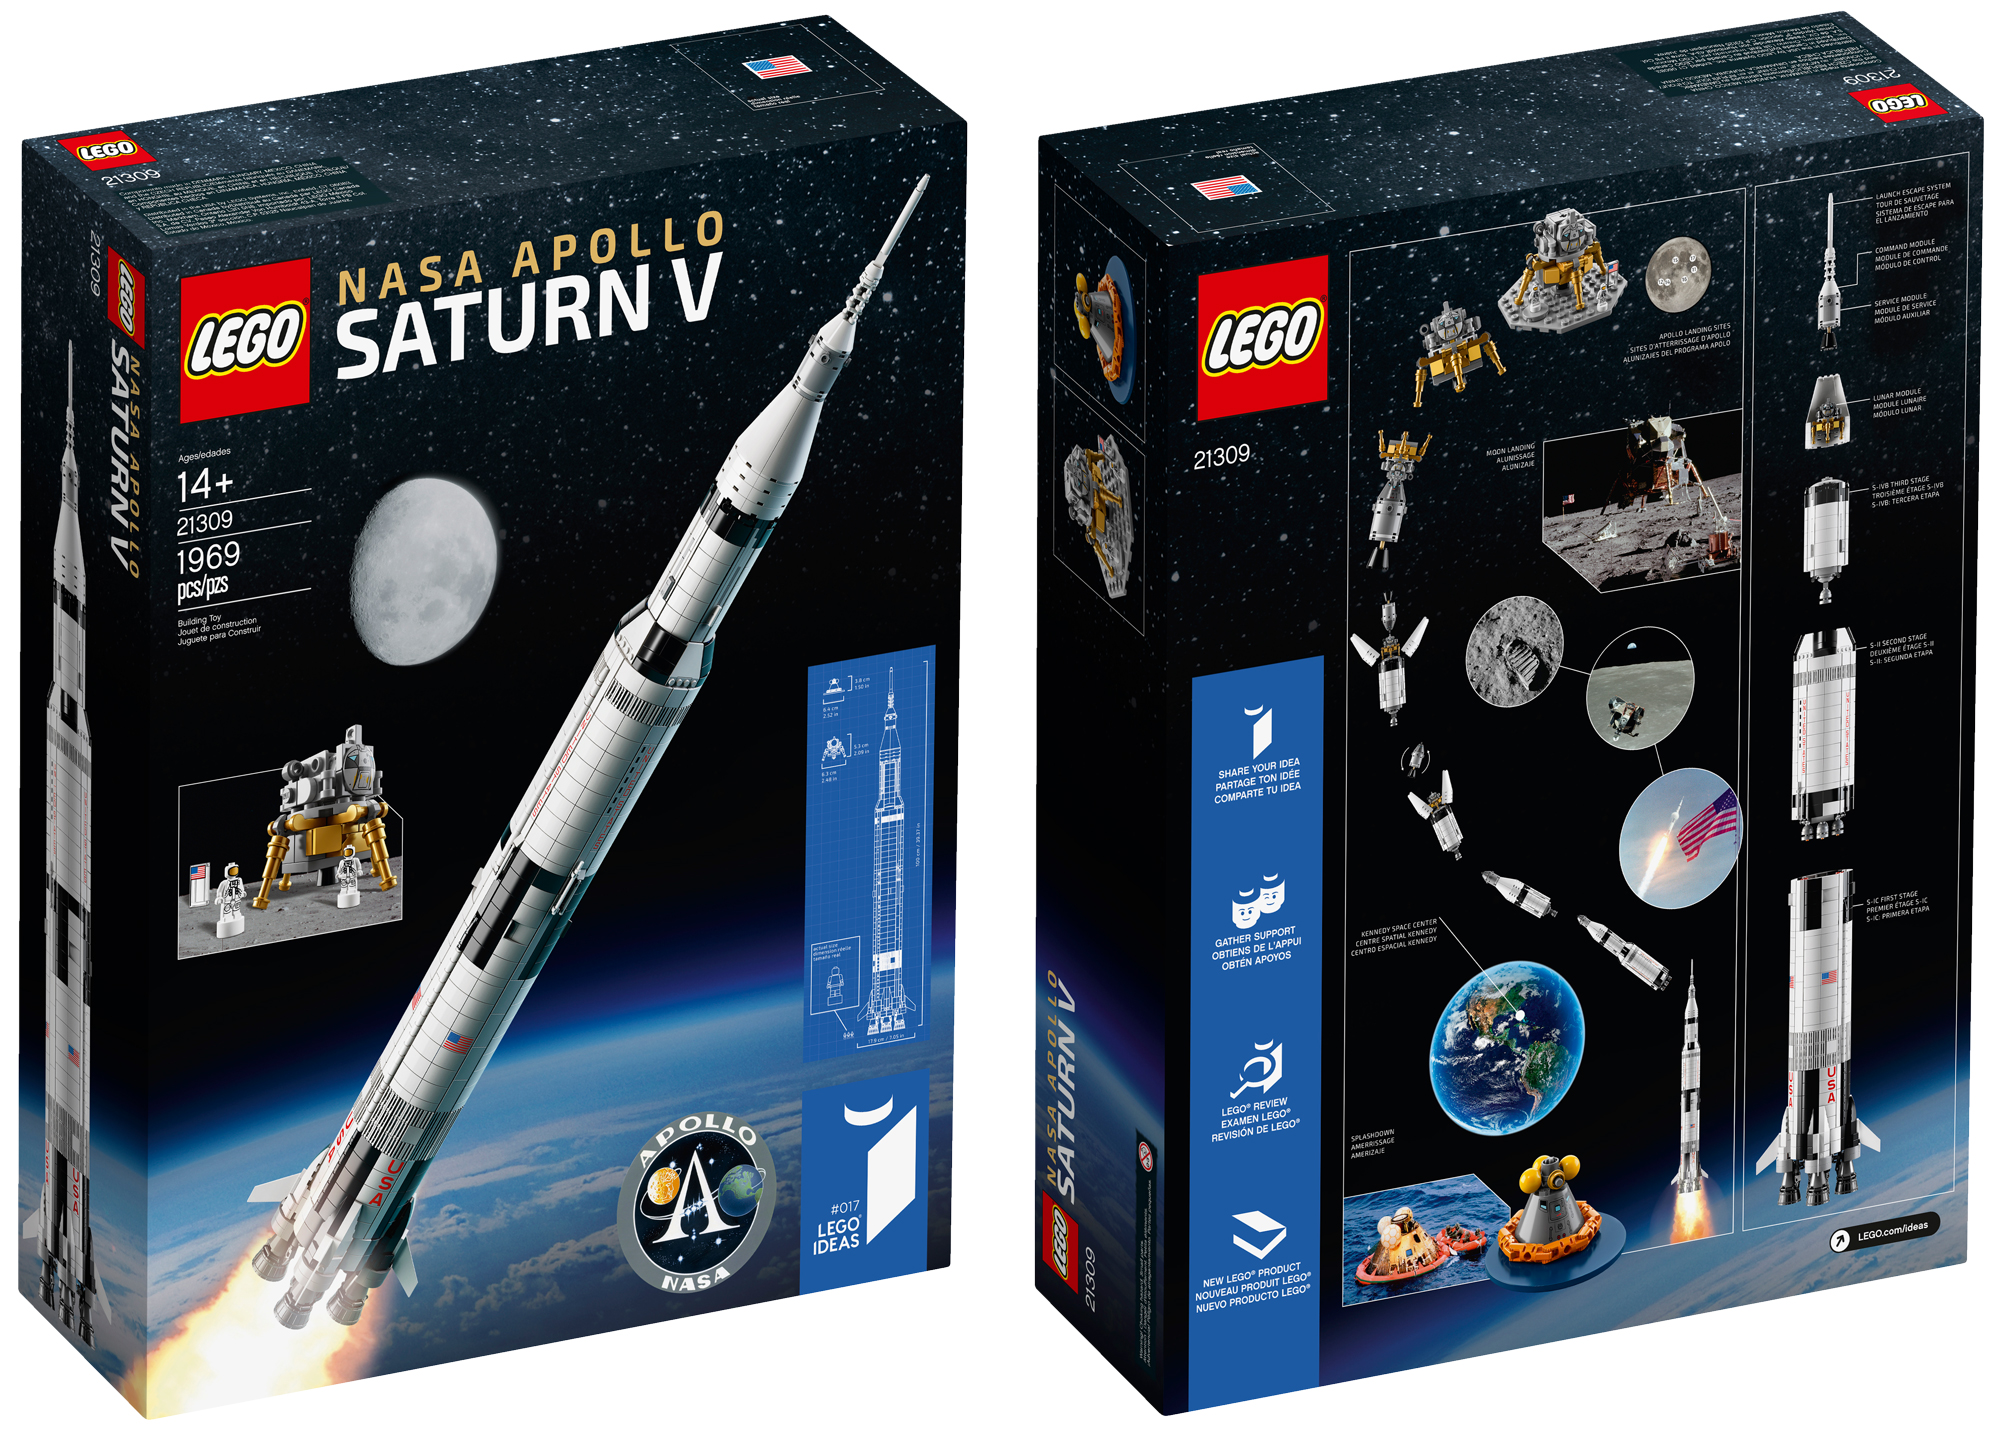 Live Out Your Astronaut Dreams With LEGO’s Metre-Tall NASA Apollo Saturn V Rocket